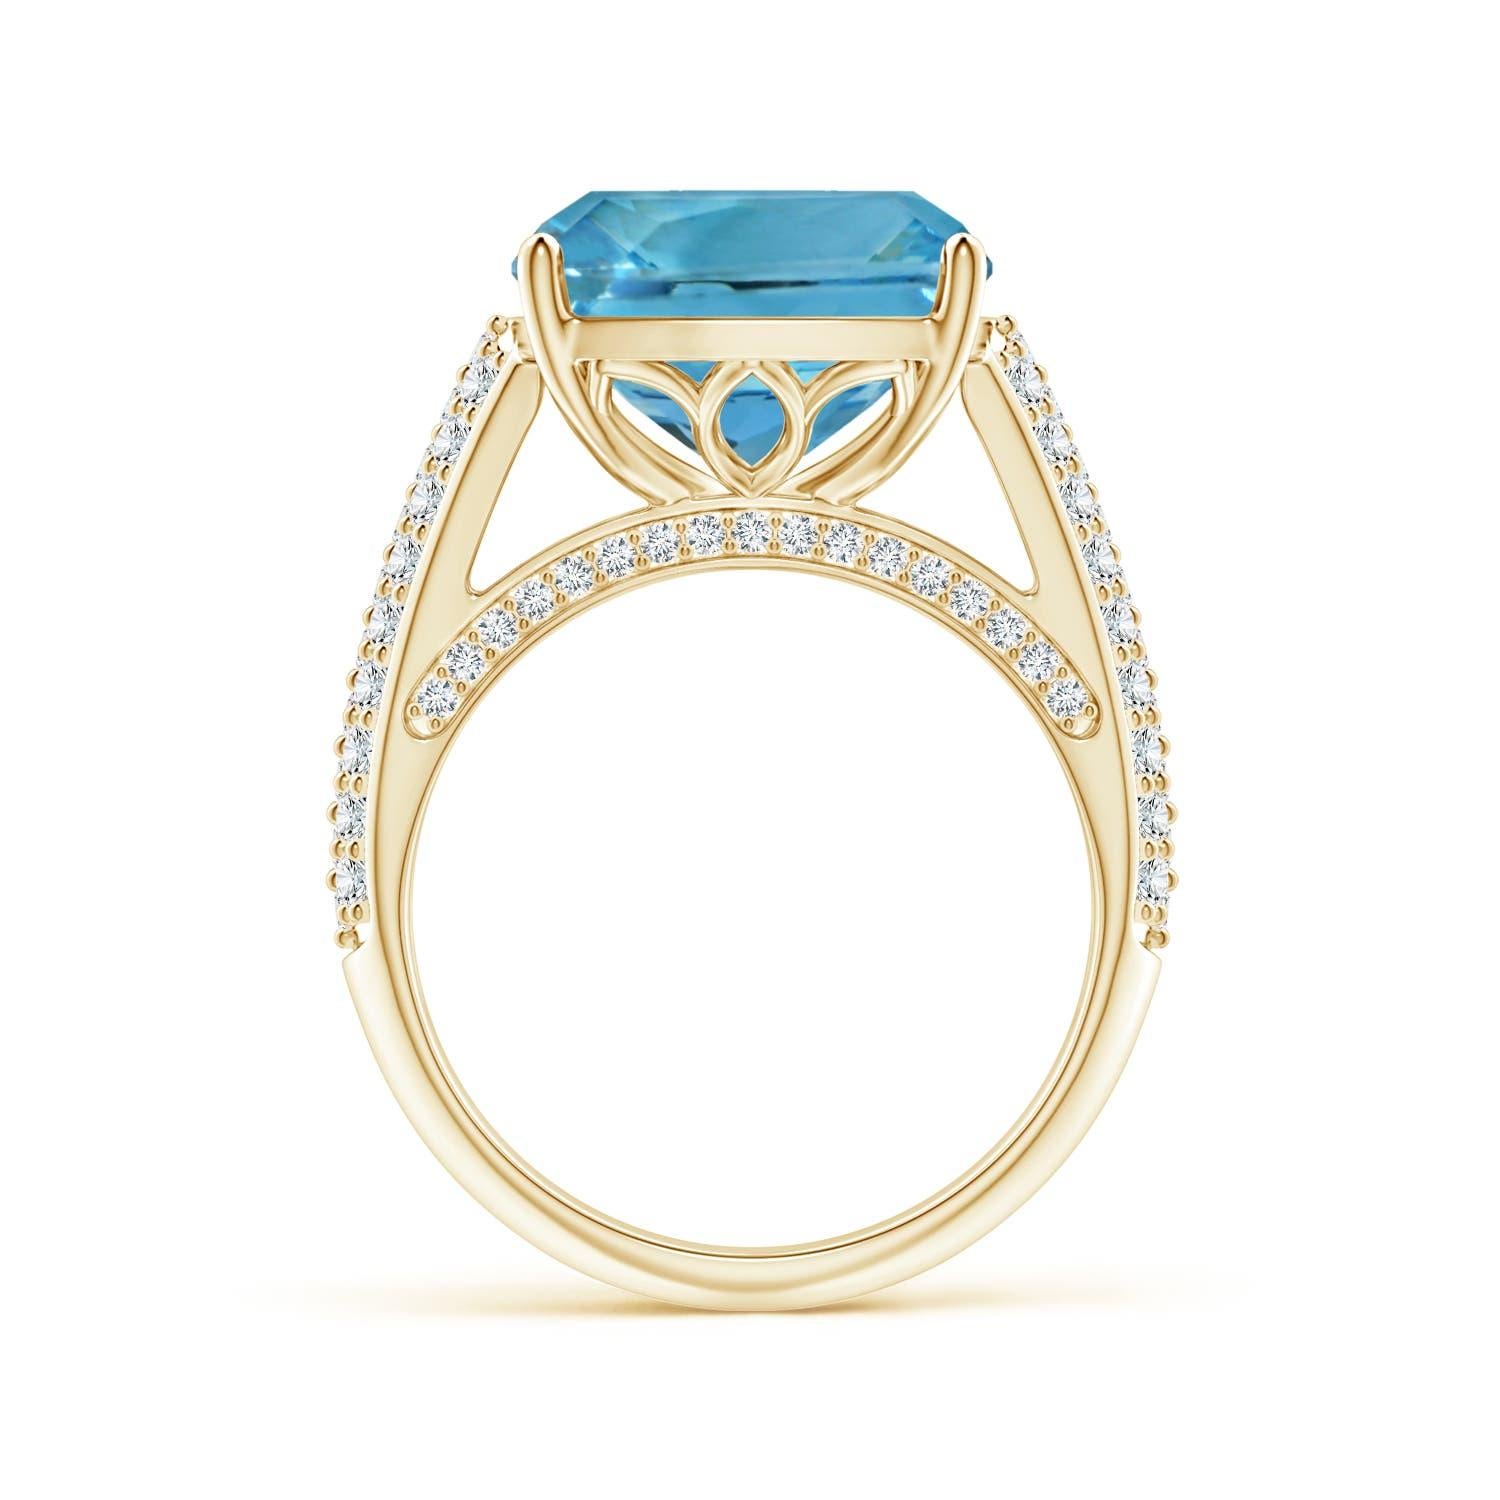 For Sale:  Angara Gia Certified Natural Aquamarine Ring in Yellow Gold with Diamonds 2